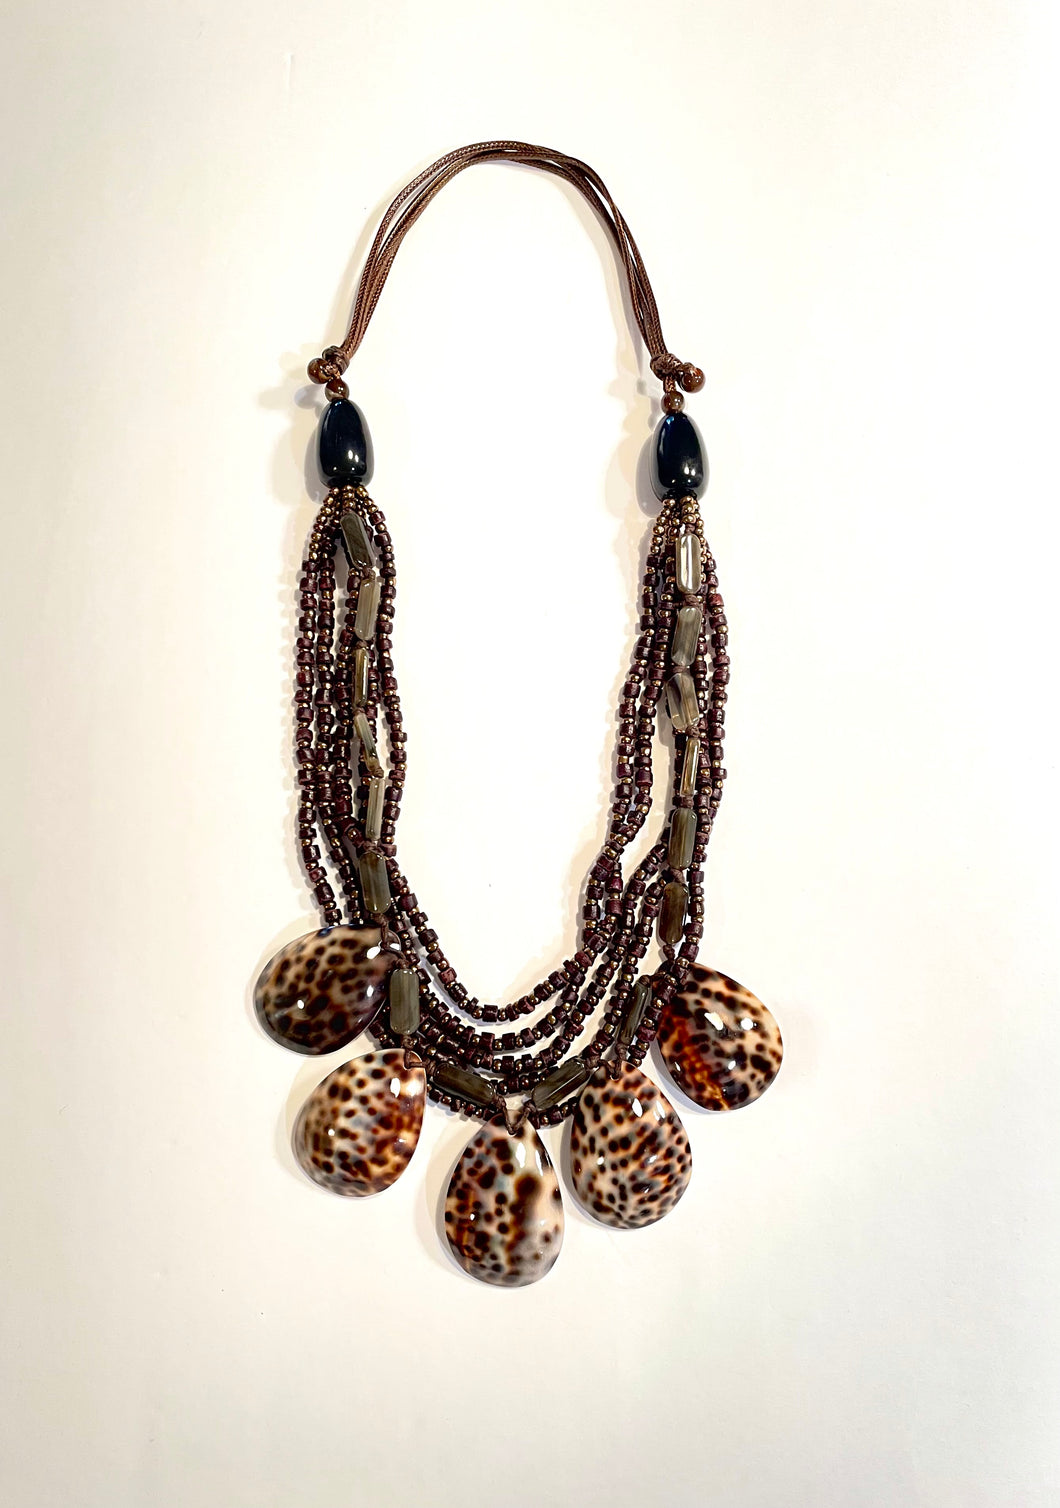 Tortoise shell and beaded bib necklace.